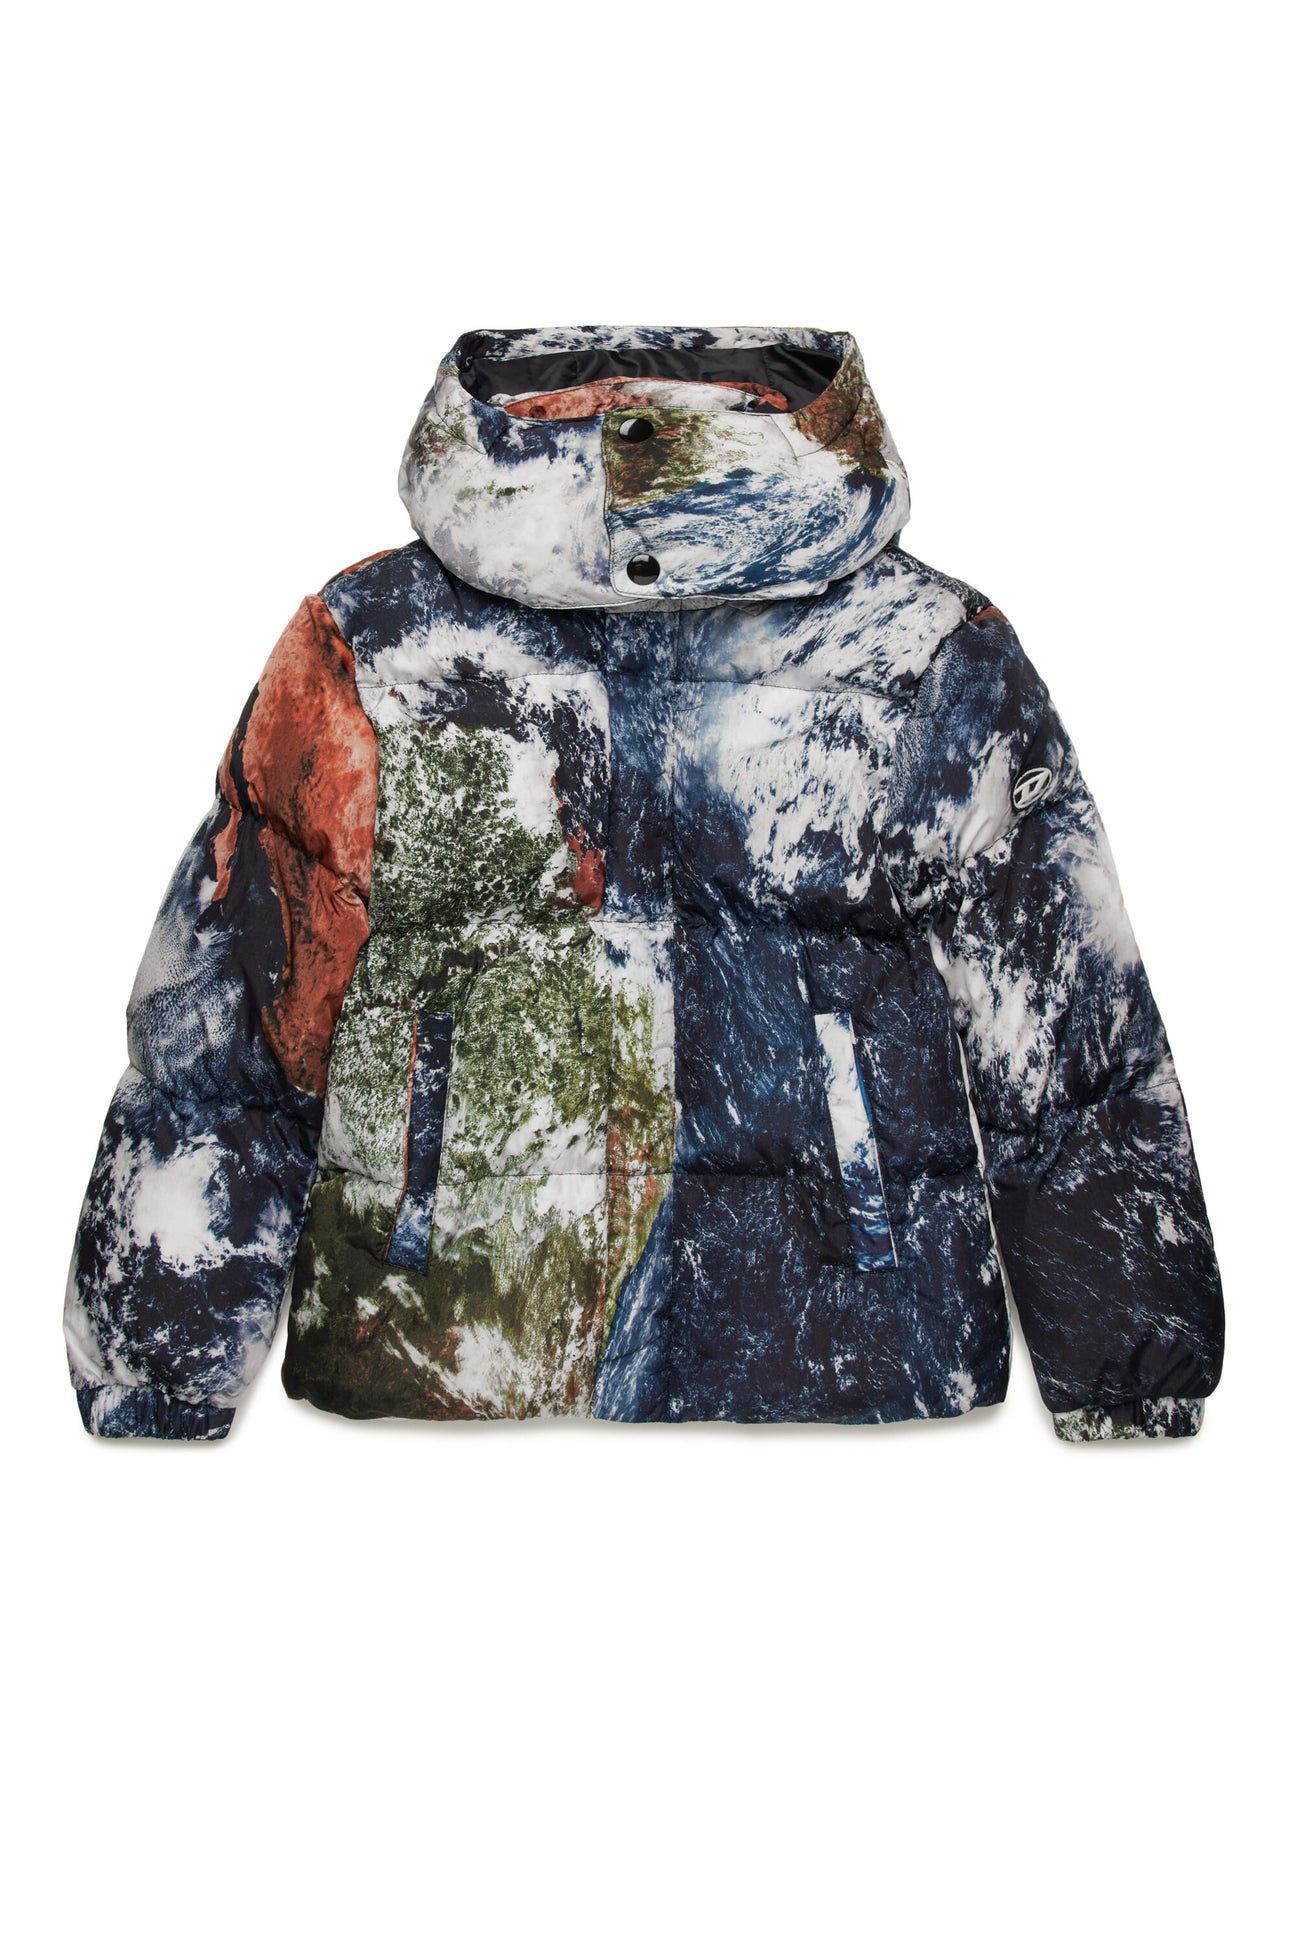 All-over Planet Camou padded jacket All-over Planet Camou padded jacket